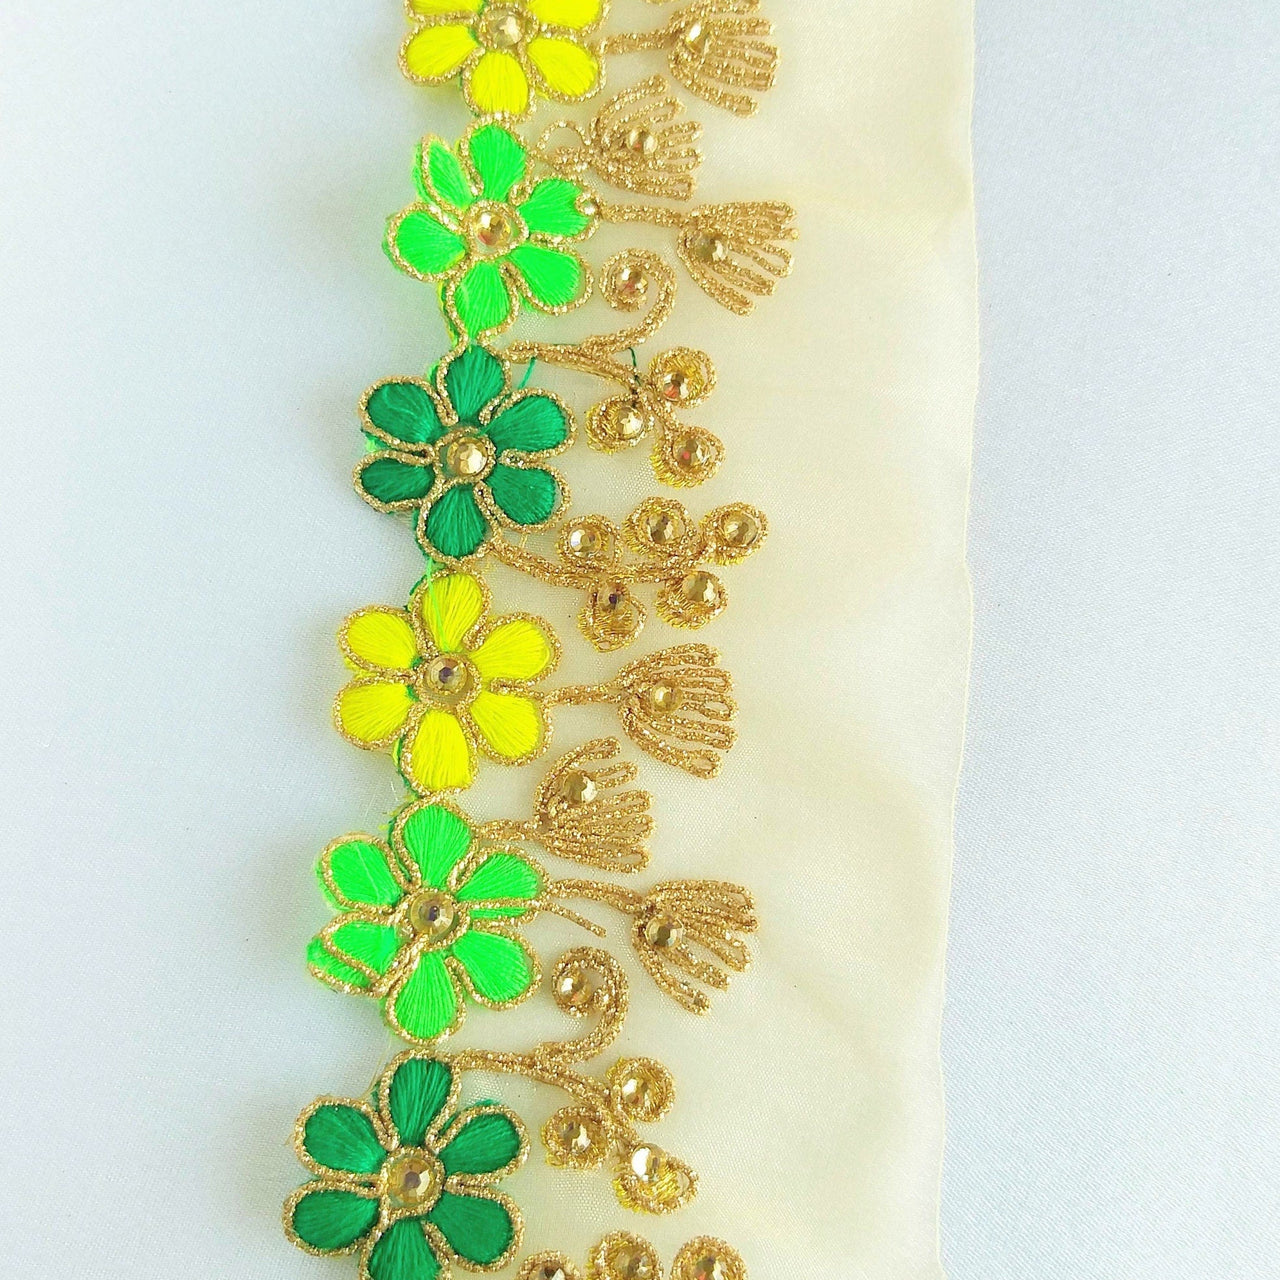 Gold Sheer Tissue Fabric Trim With Embroidered Green & Gold Flowers, Embellished With Beads, Approx. 65 mm Wide - 210119L105